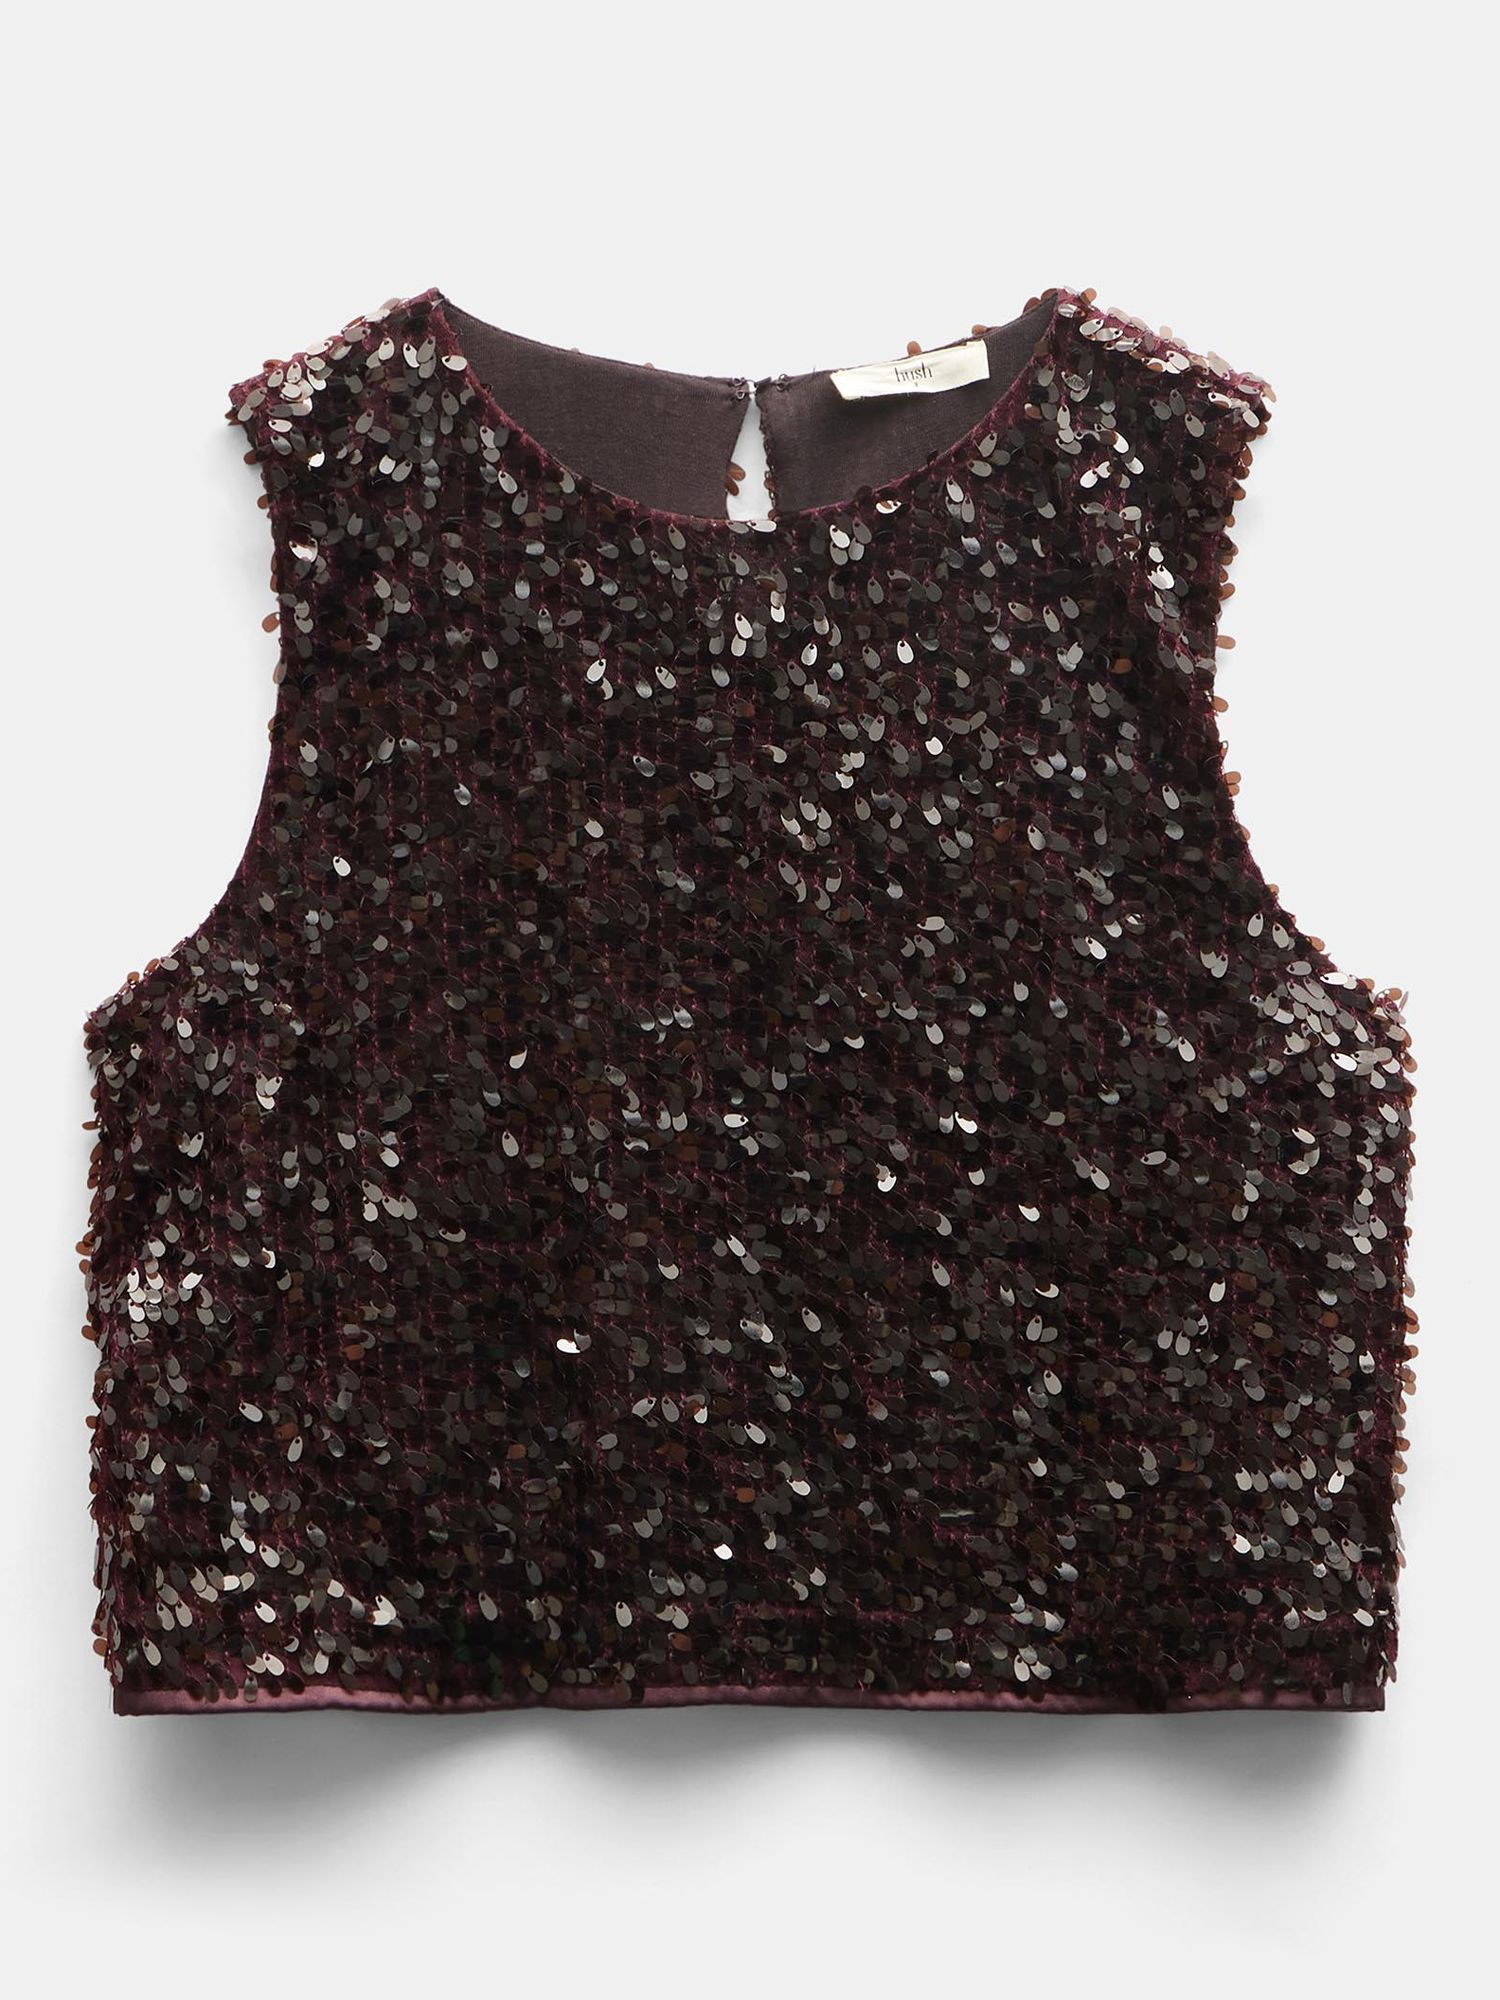 Buy HUSH Zarina Cropped Sequin Top, Chocolate Online at johnlewis.com